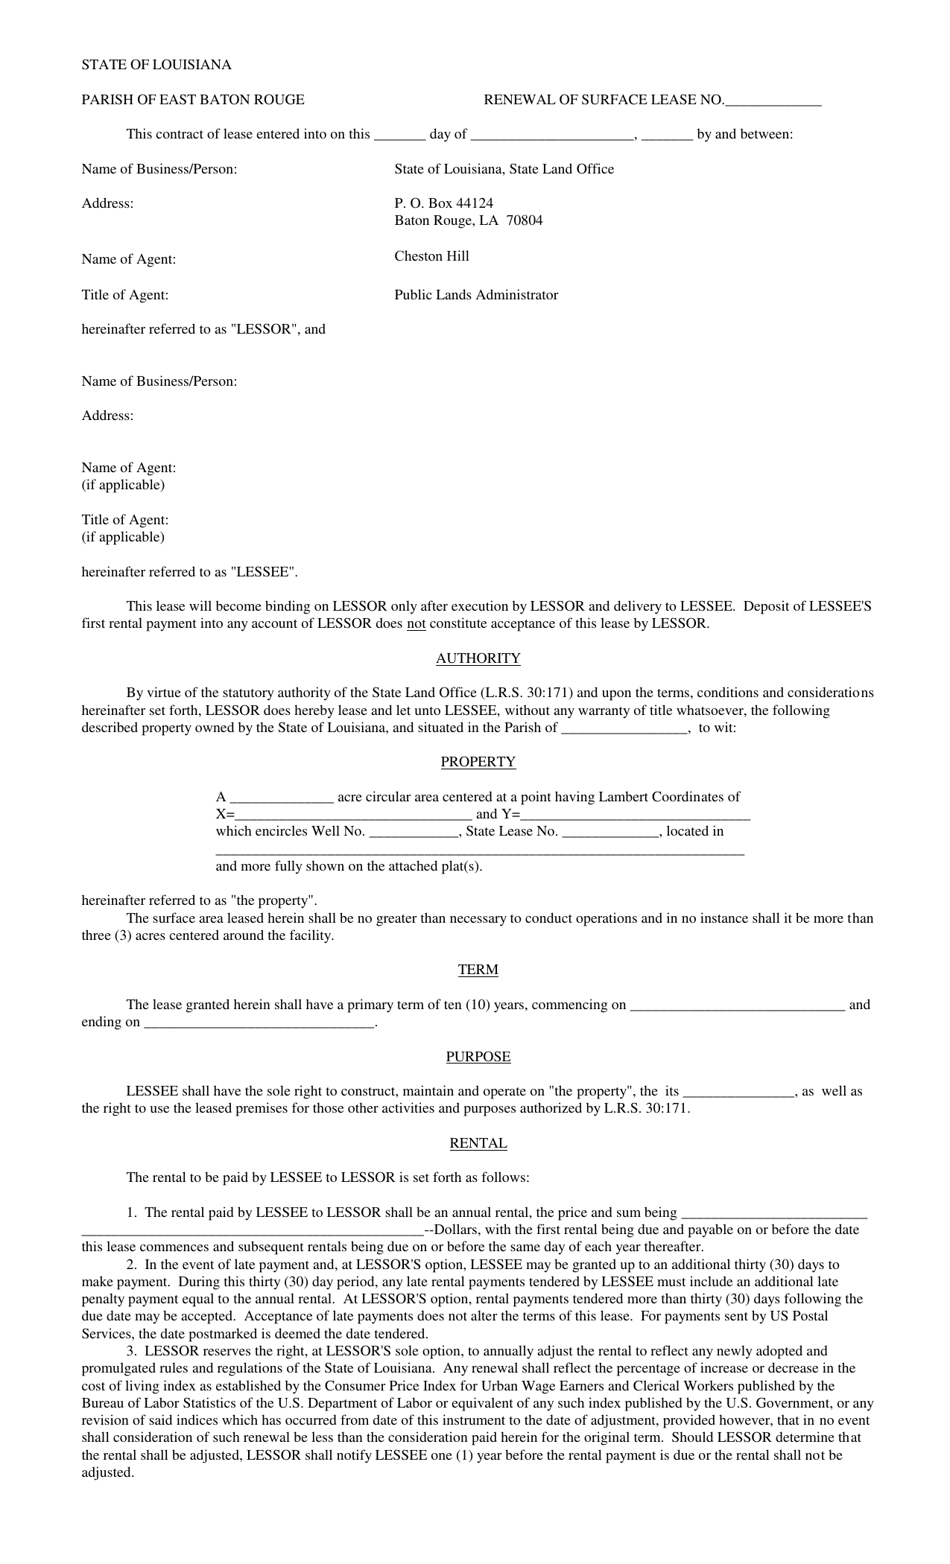 Renewal of Surface Lease - Louisiana, Page 1